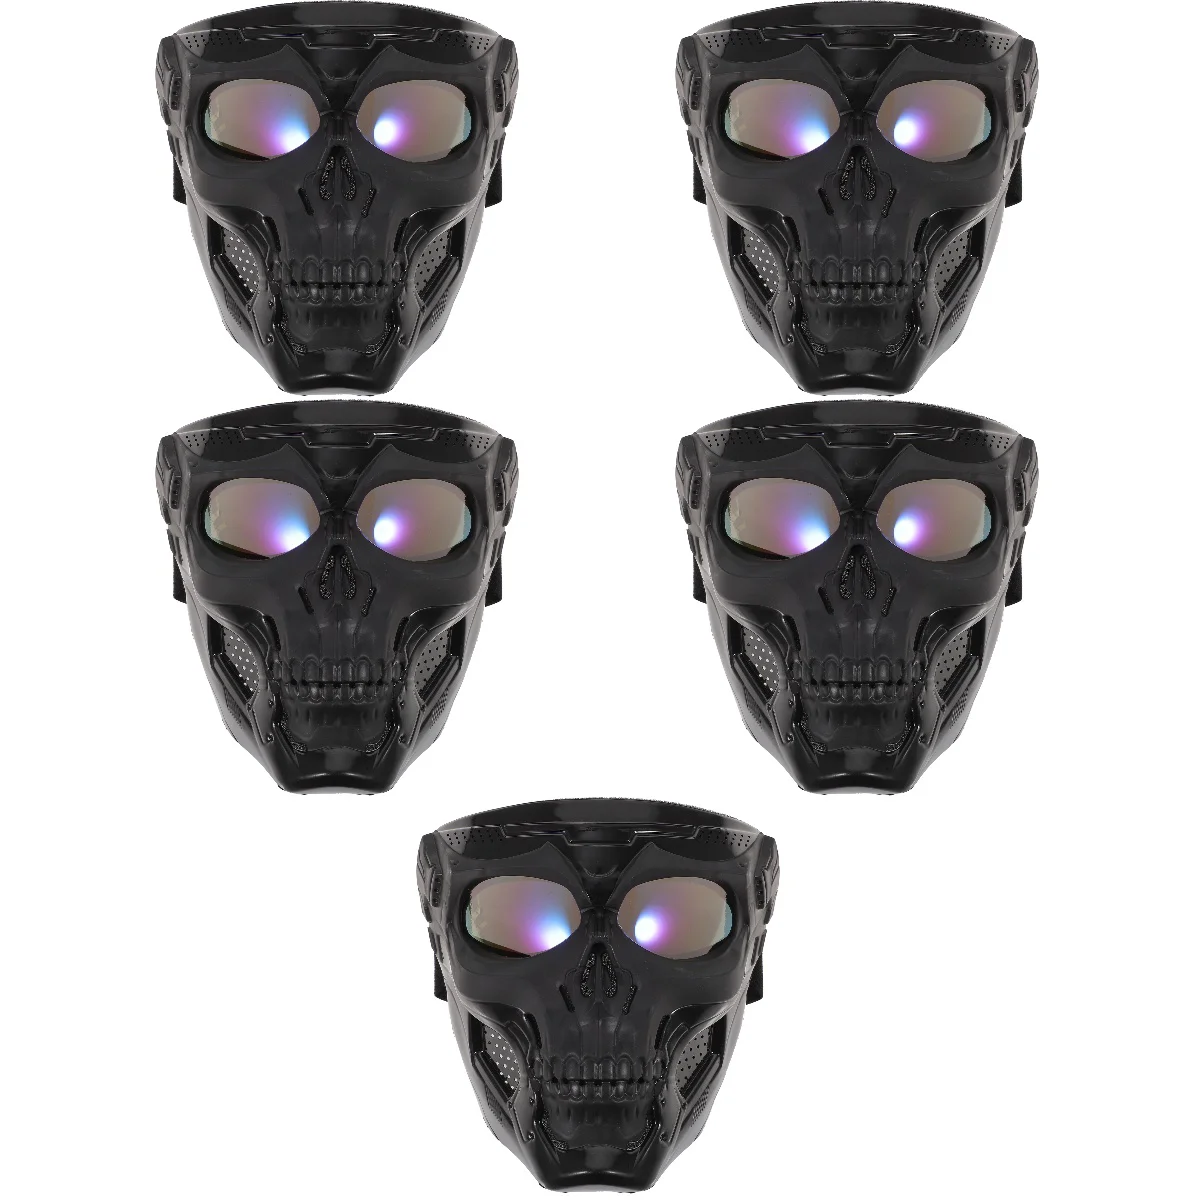 

Set 5 Cos Mask Men Riding Gear Goggles Abs Man Motorcycle Glasses Safety Quadcopter